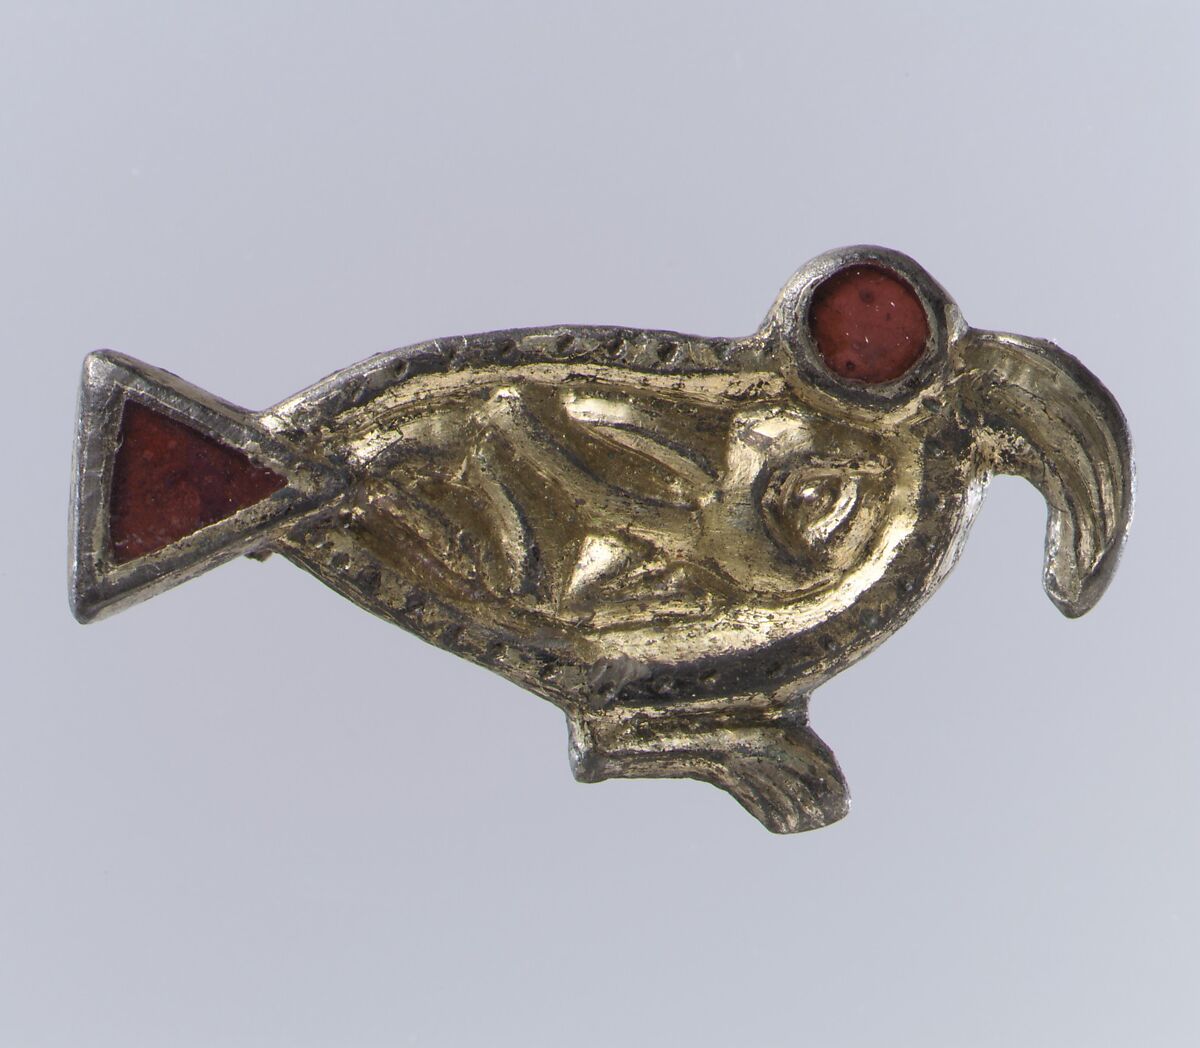 Bird-Shaped Brooch, Silver with gilding and garnets; no spring/pin extant, Anglo-Saxon 